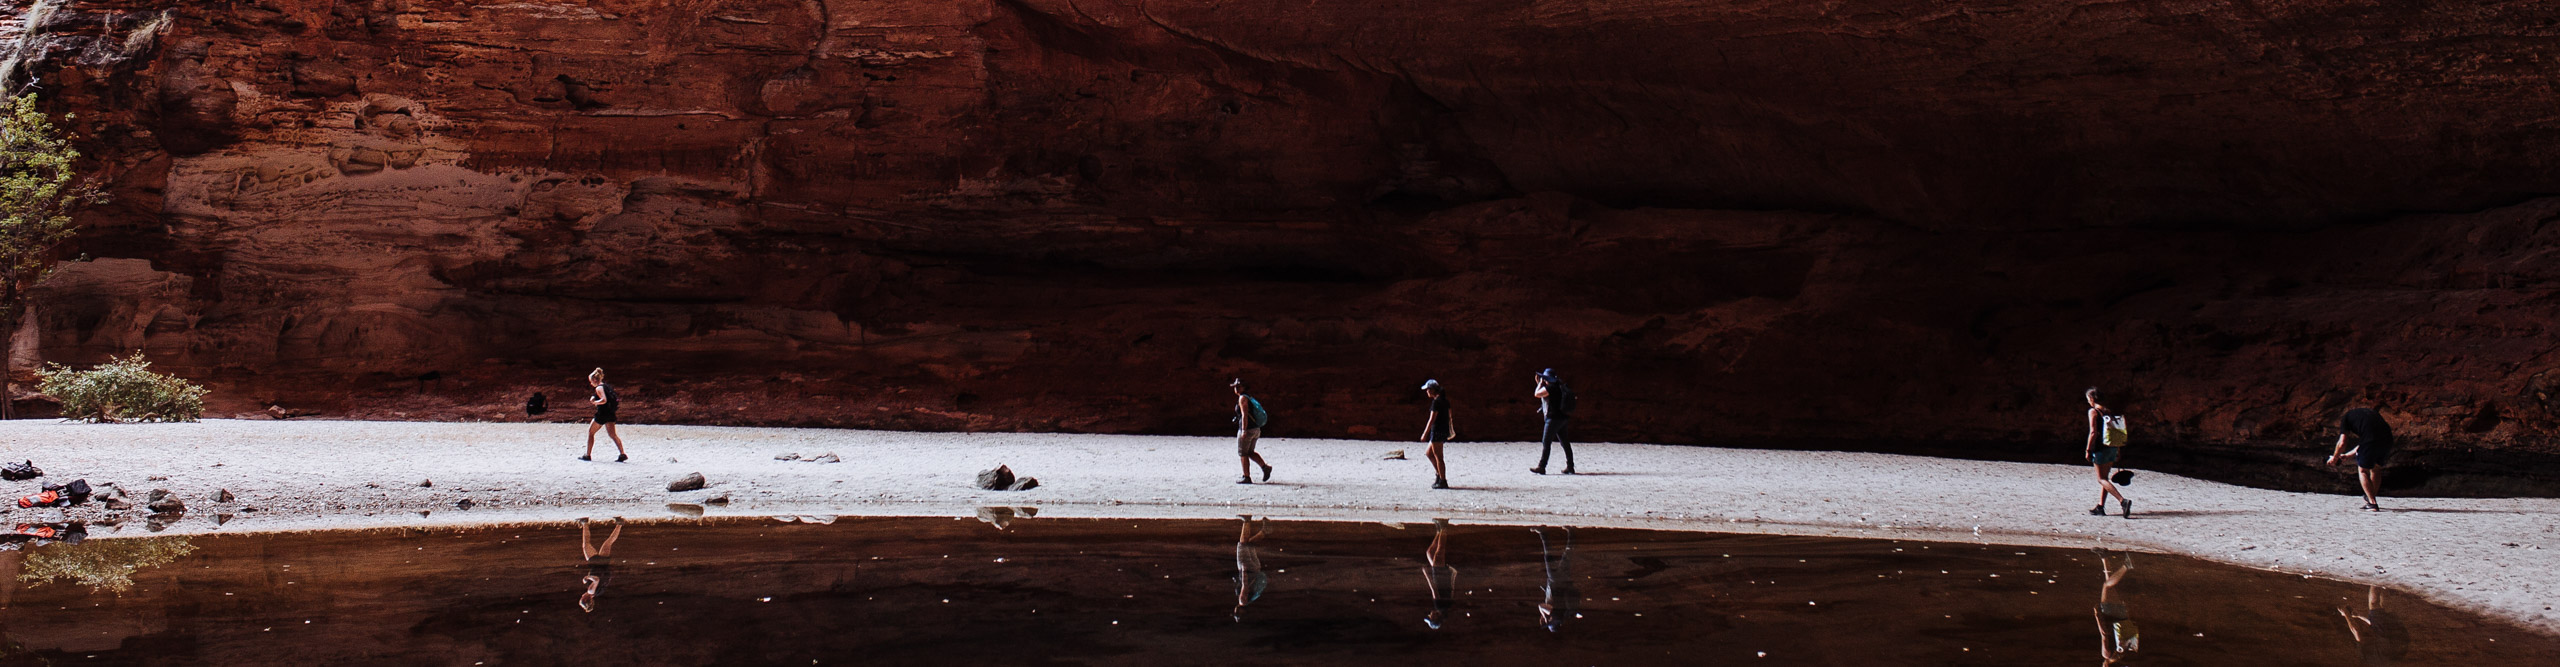 Hikers walking near the water through the red rock of the gorge at the Kimberley, Western Australia 